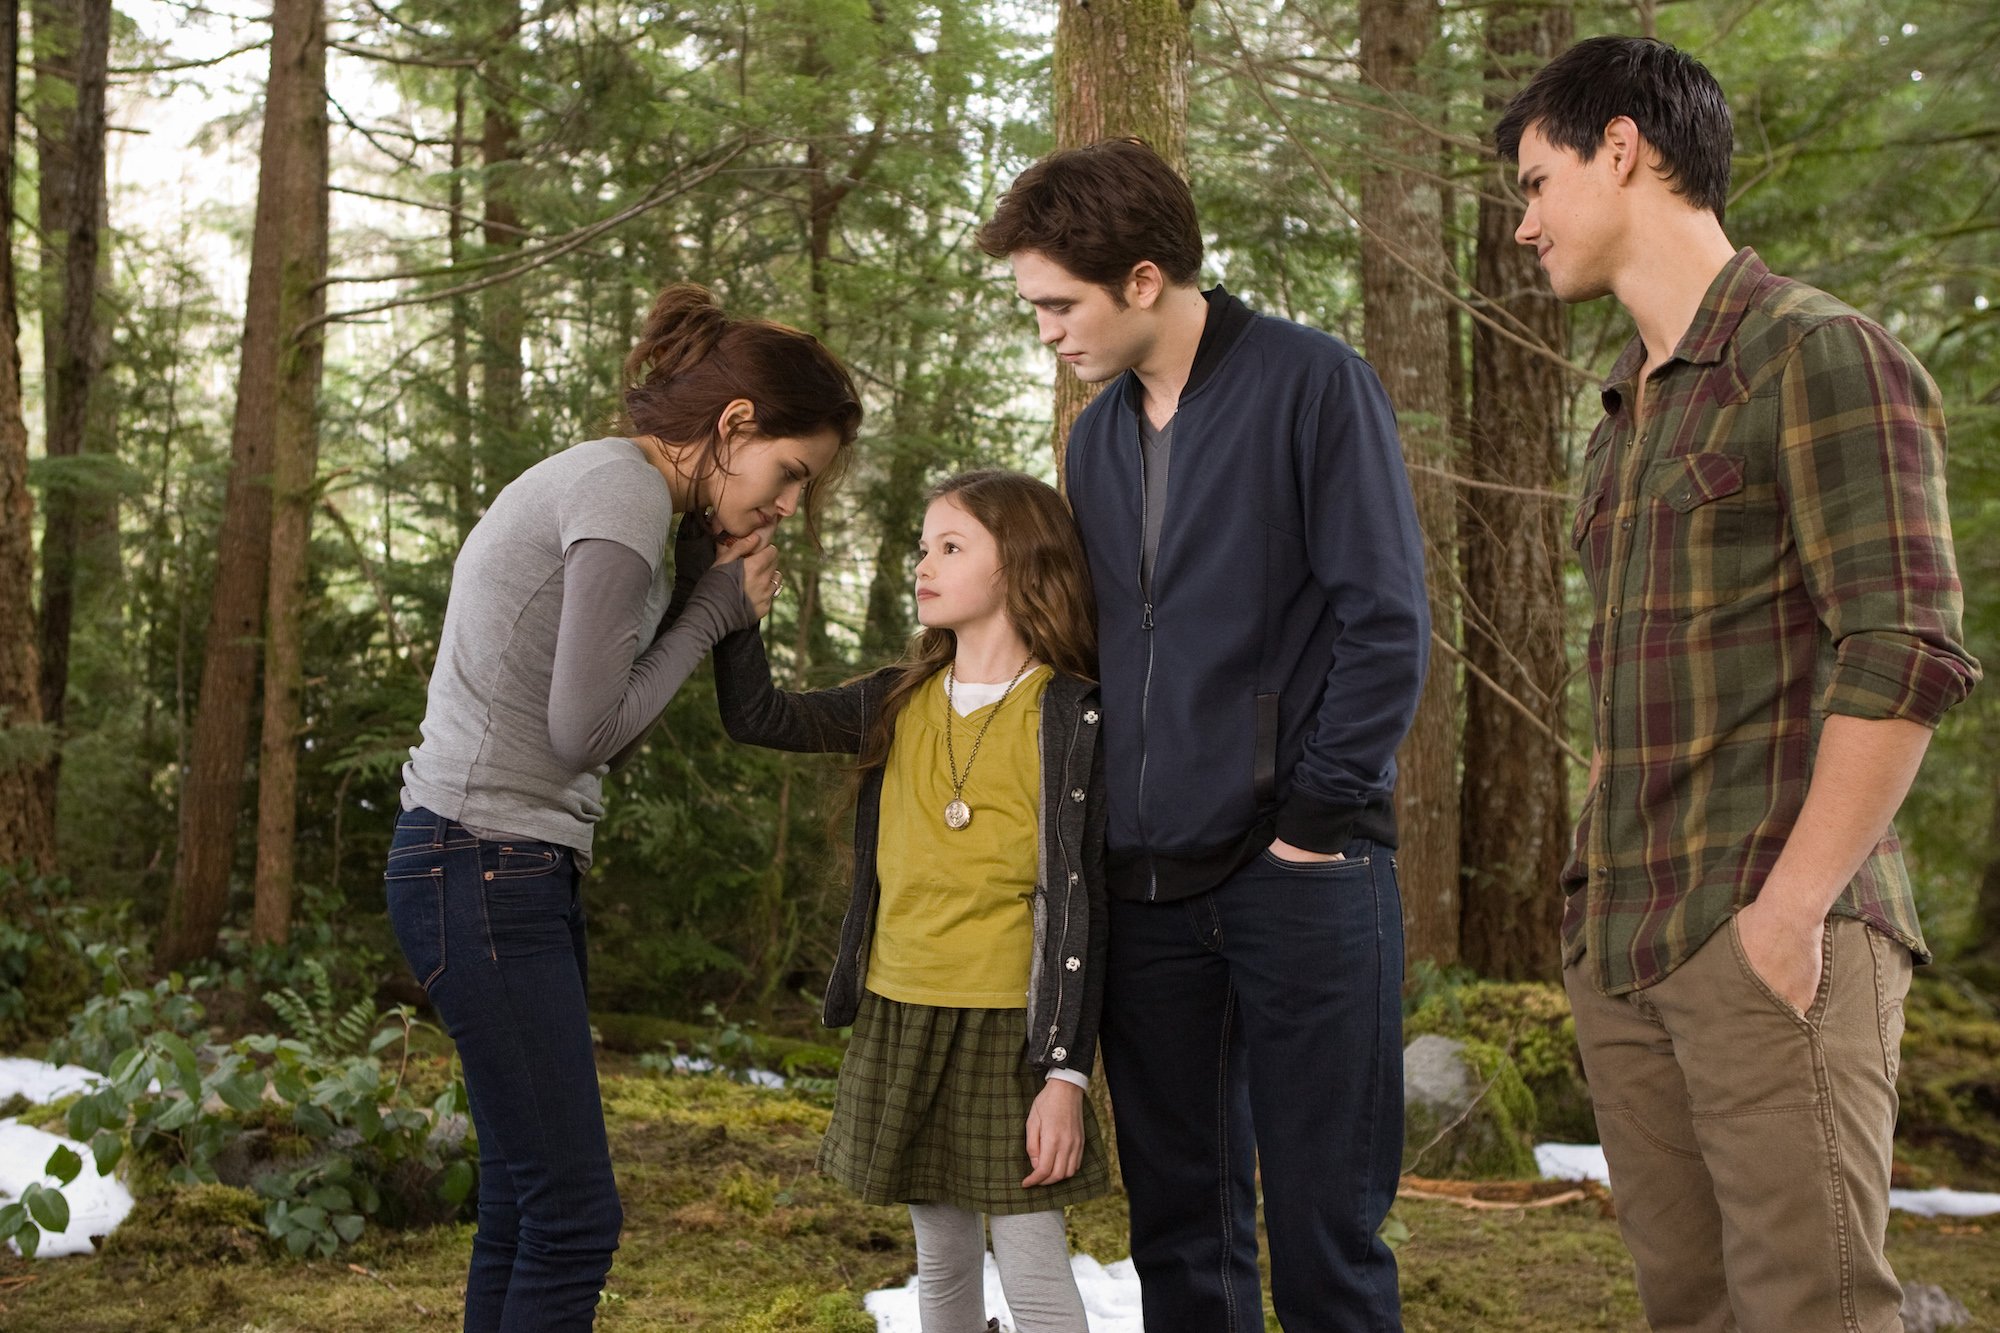 There S A Massive Plot Hole In Twilight Breaking Dawn Part 2 Involving Alice S Visions